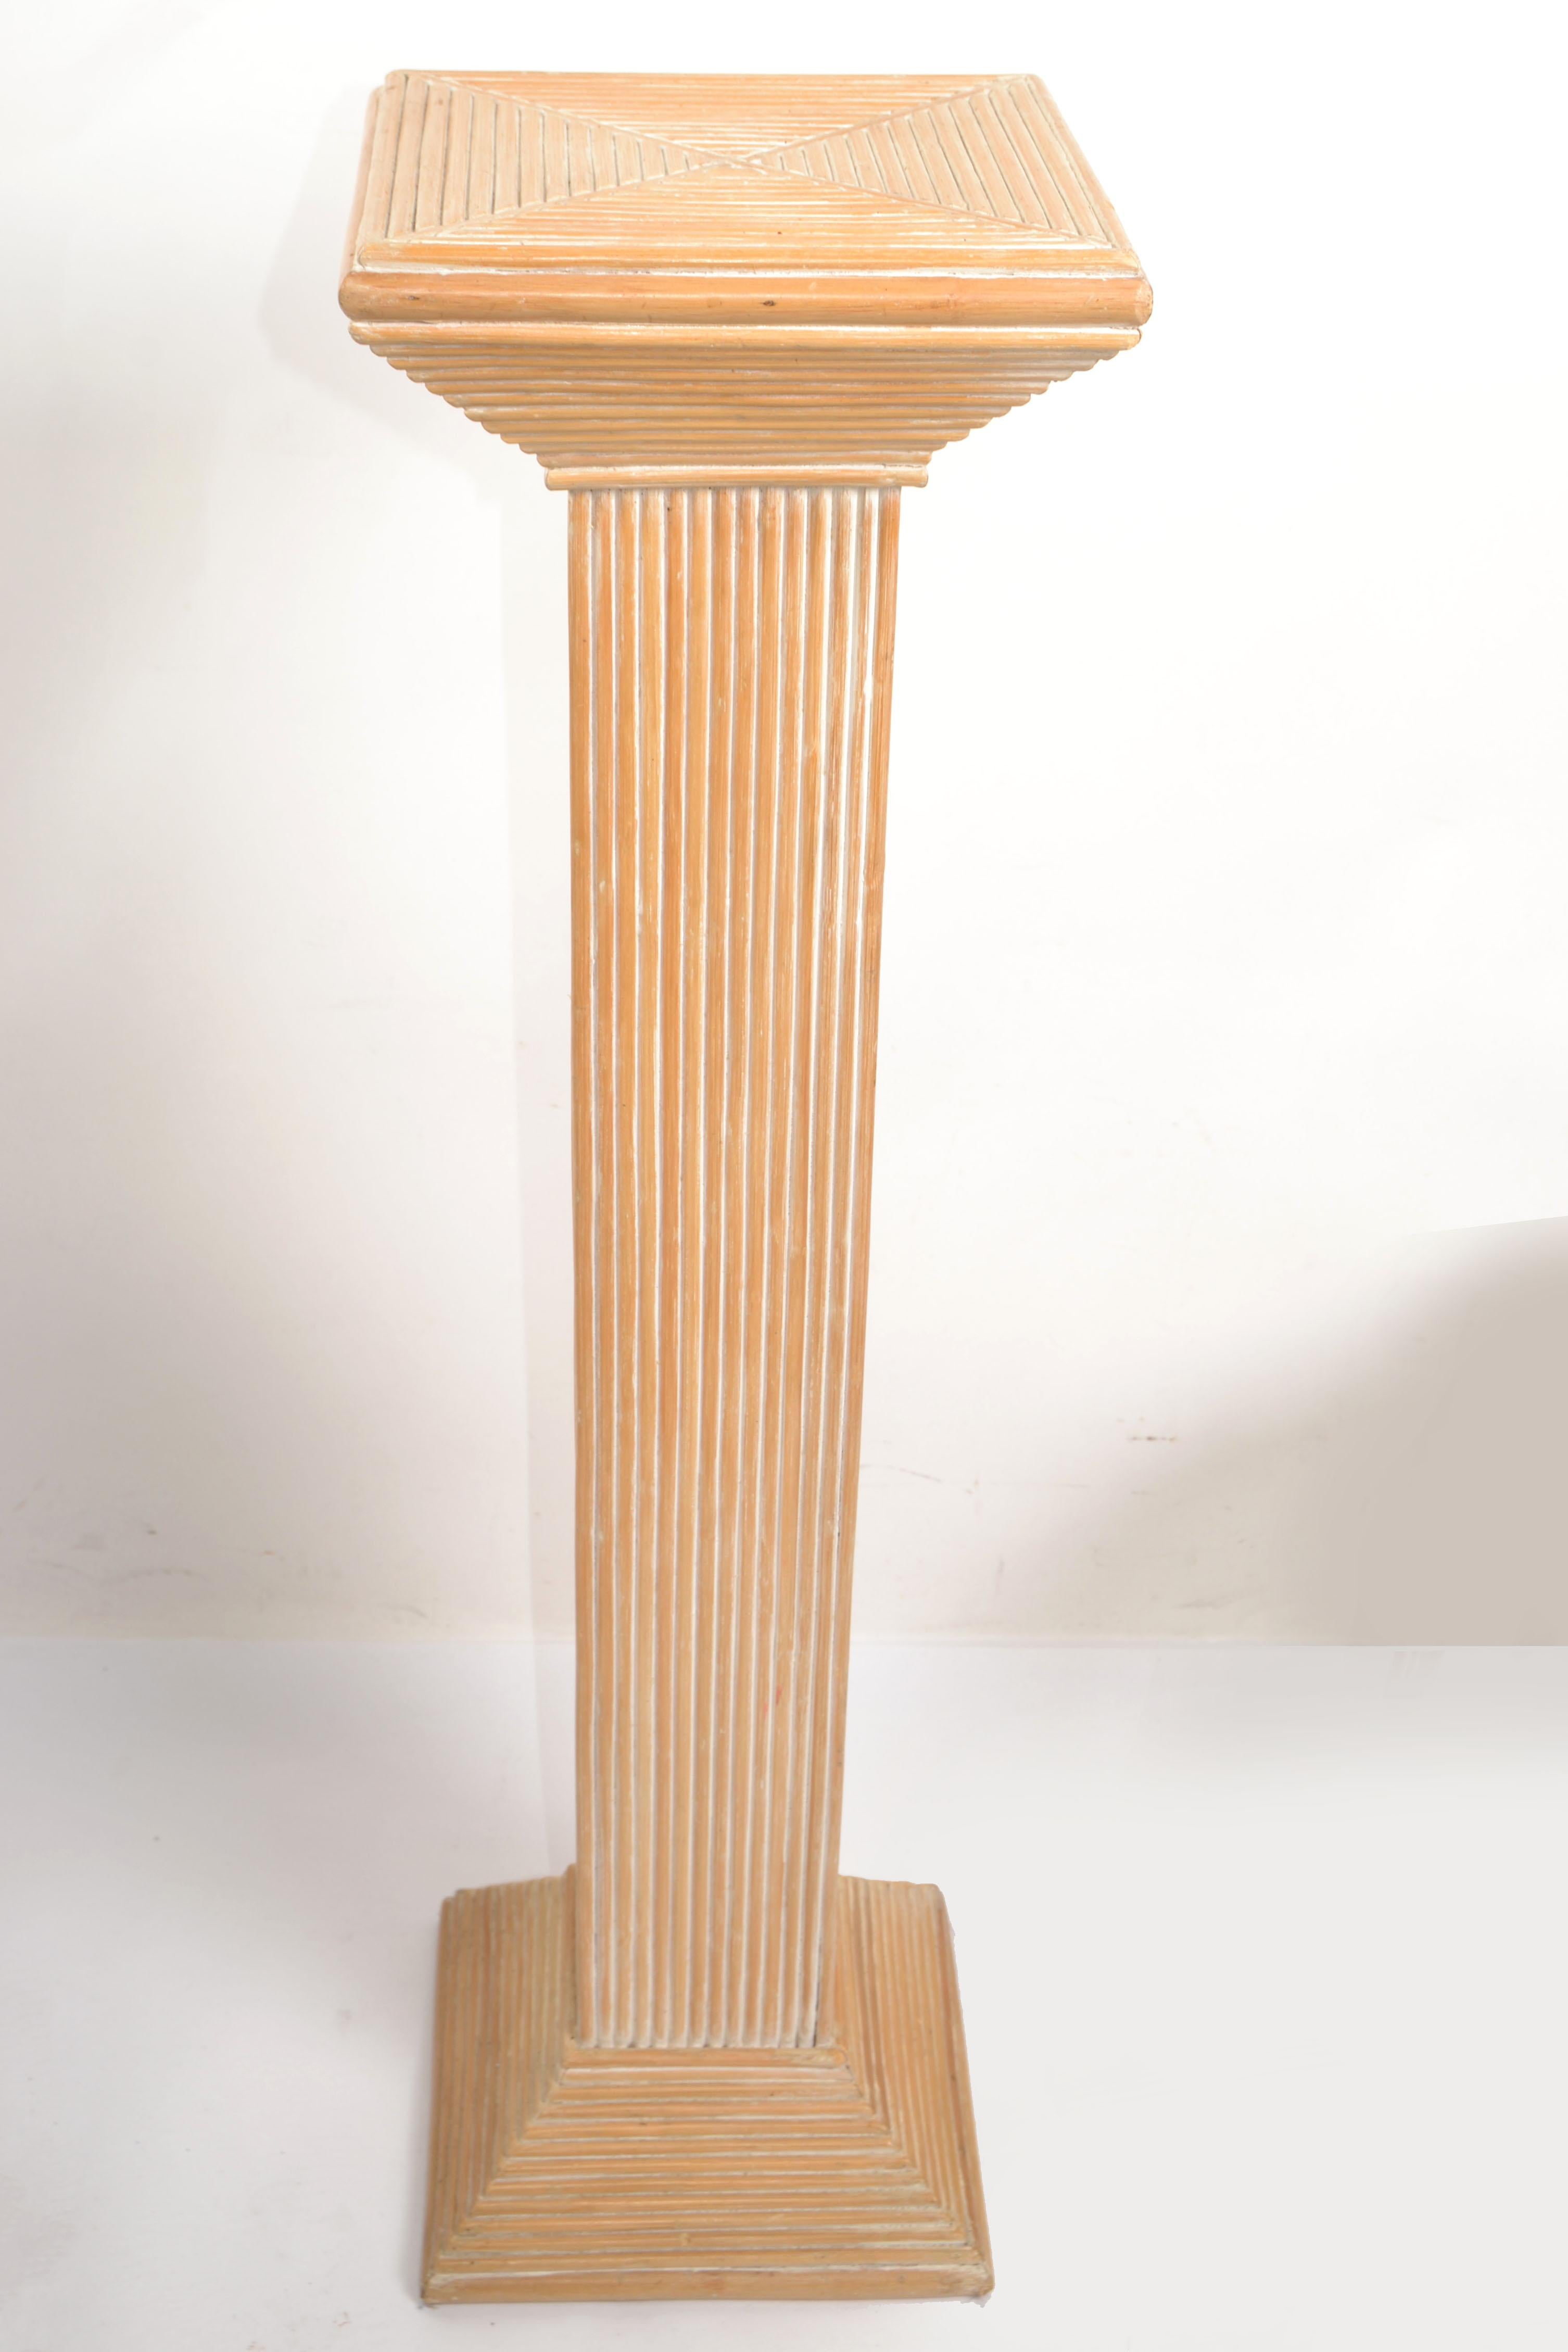 1980s Vintage bleached Pencil Reed handcrafted Pedestal, Column or Plant Stand in the Style of McGuire made in USA circa late 20th Century.
For indoor use only to display Home Decor or Plants.
All handmade and sturdy to hold heavy items such as